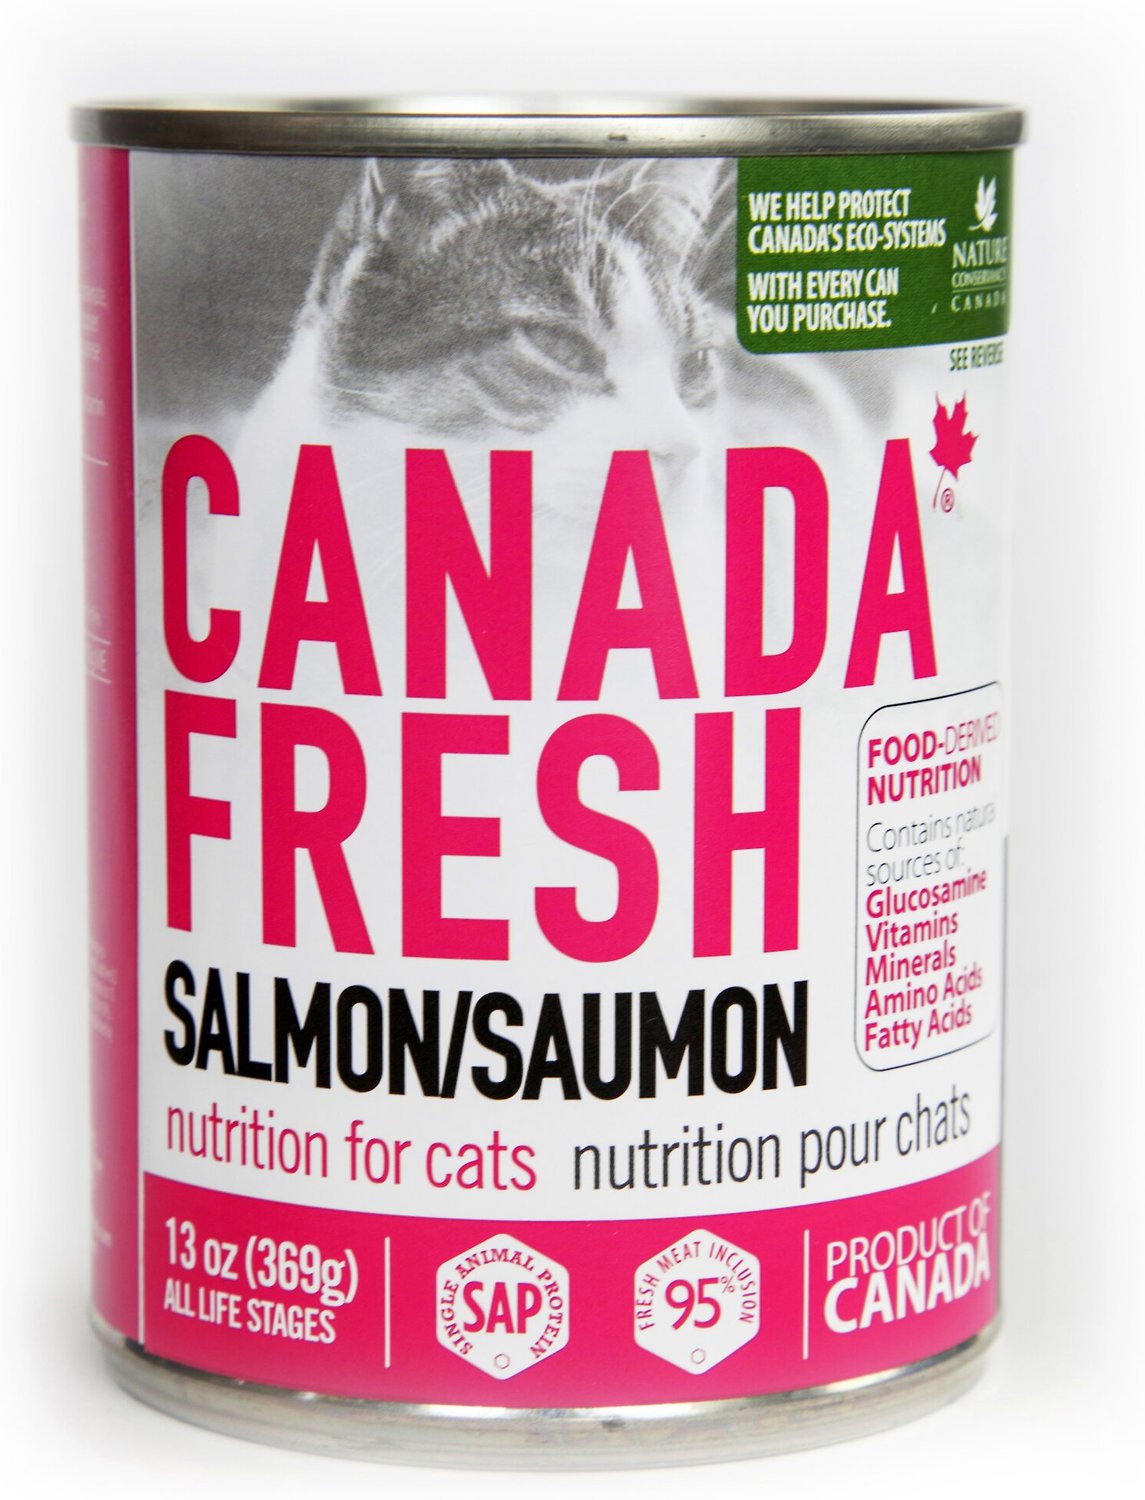 Canada Fresh Salmon Canned Cat Food, 13oz, case of 12